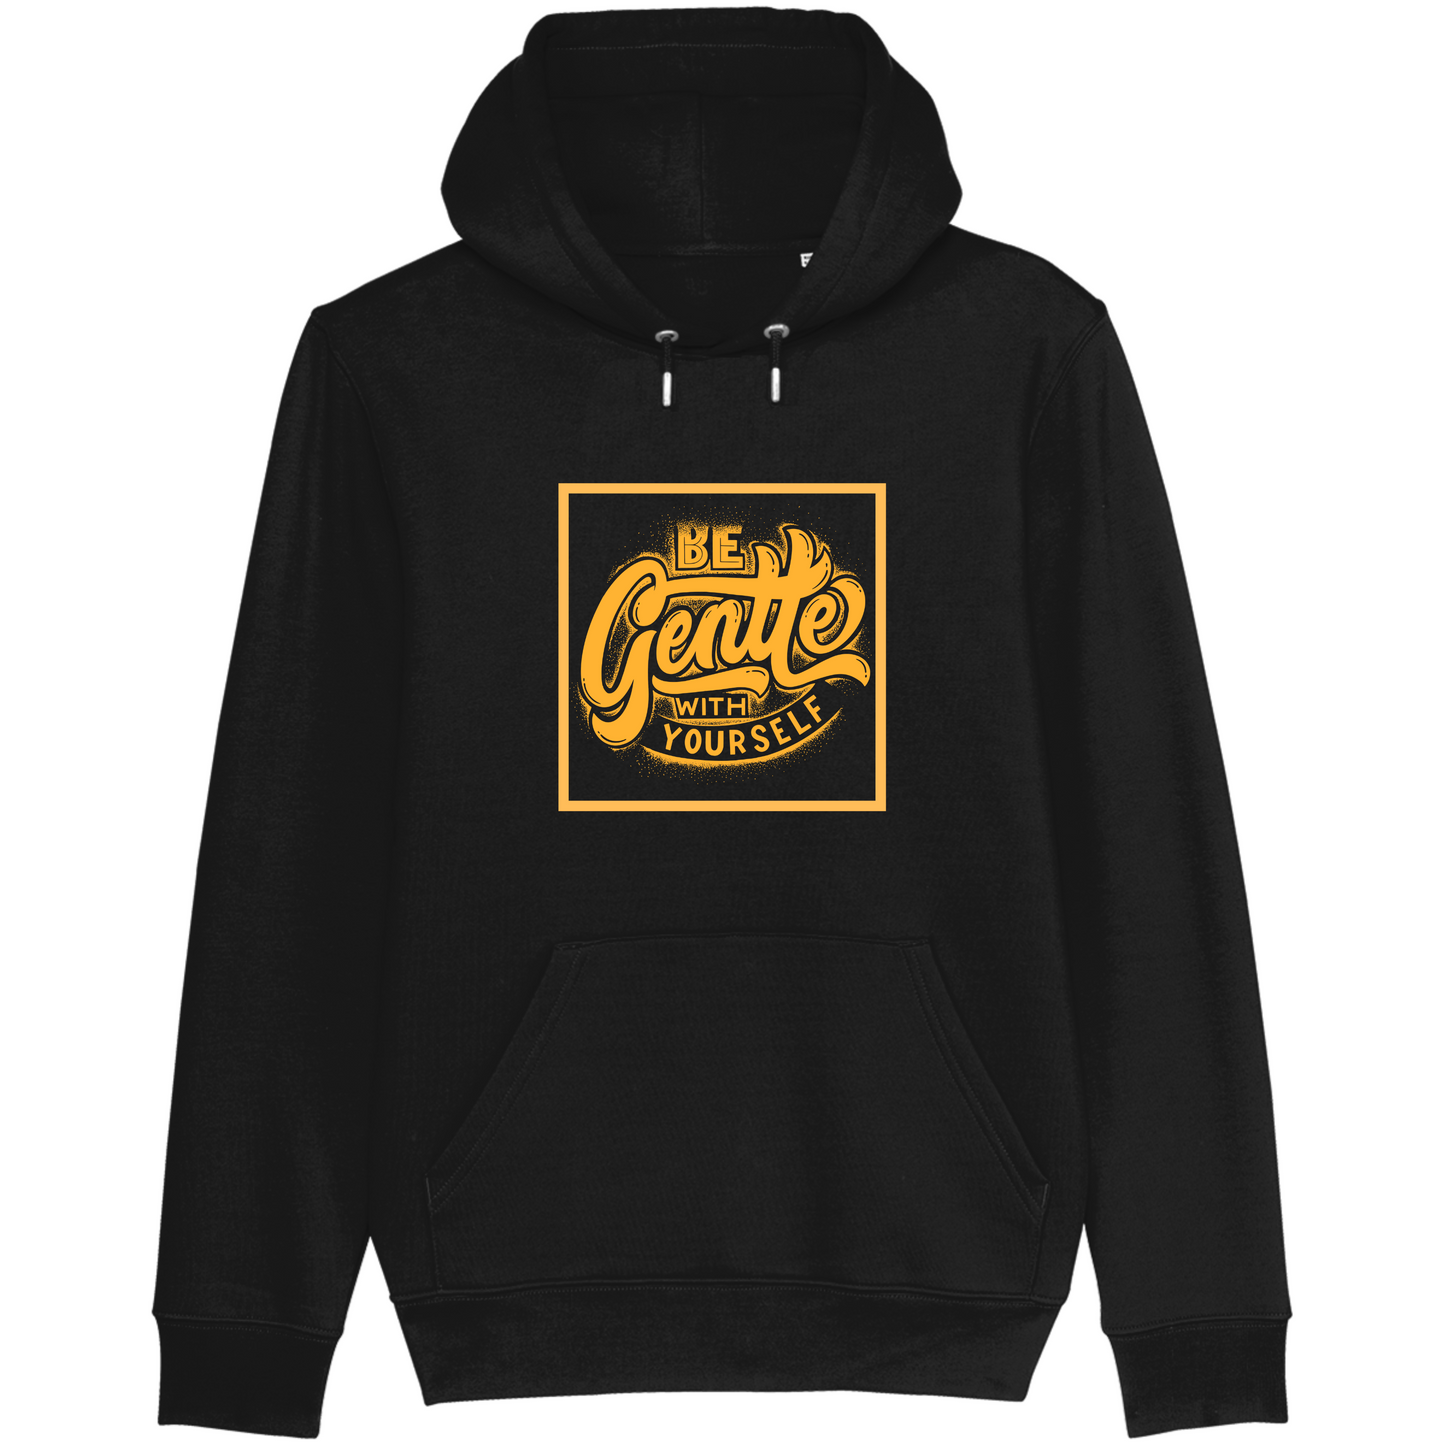 Be Gentle With Yourself - Hoodie